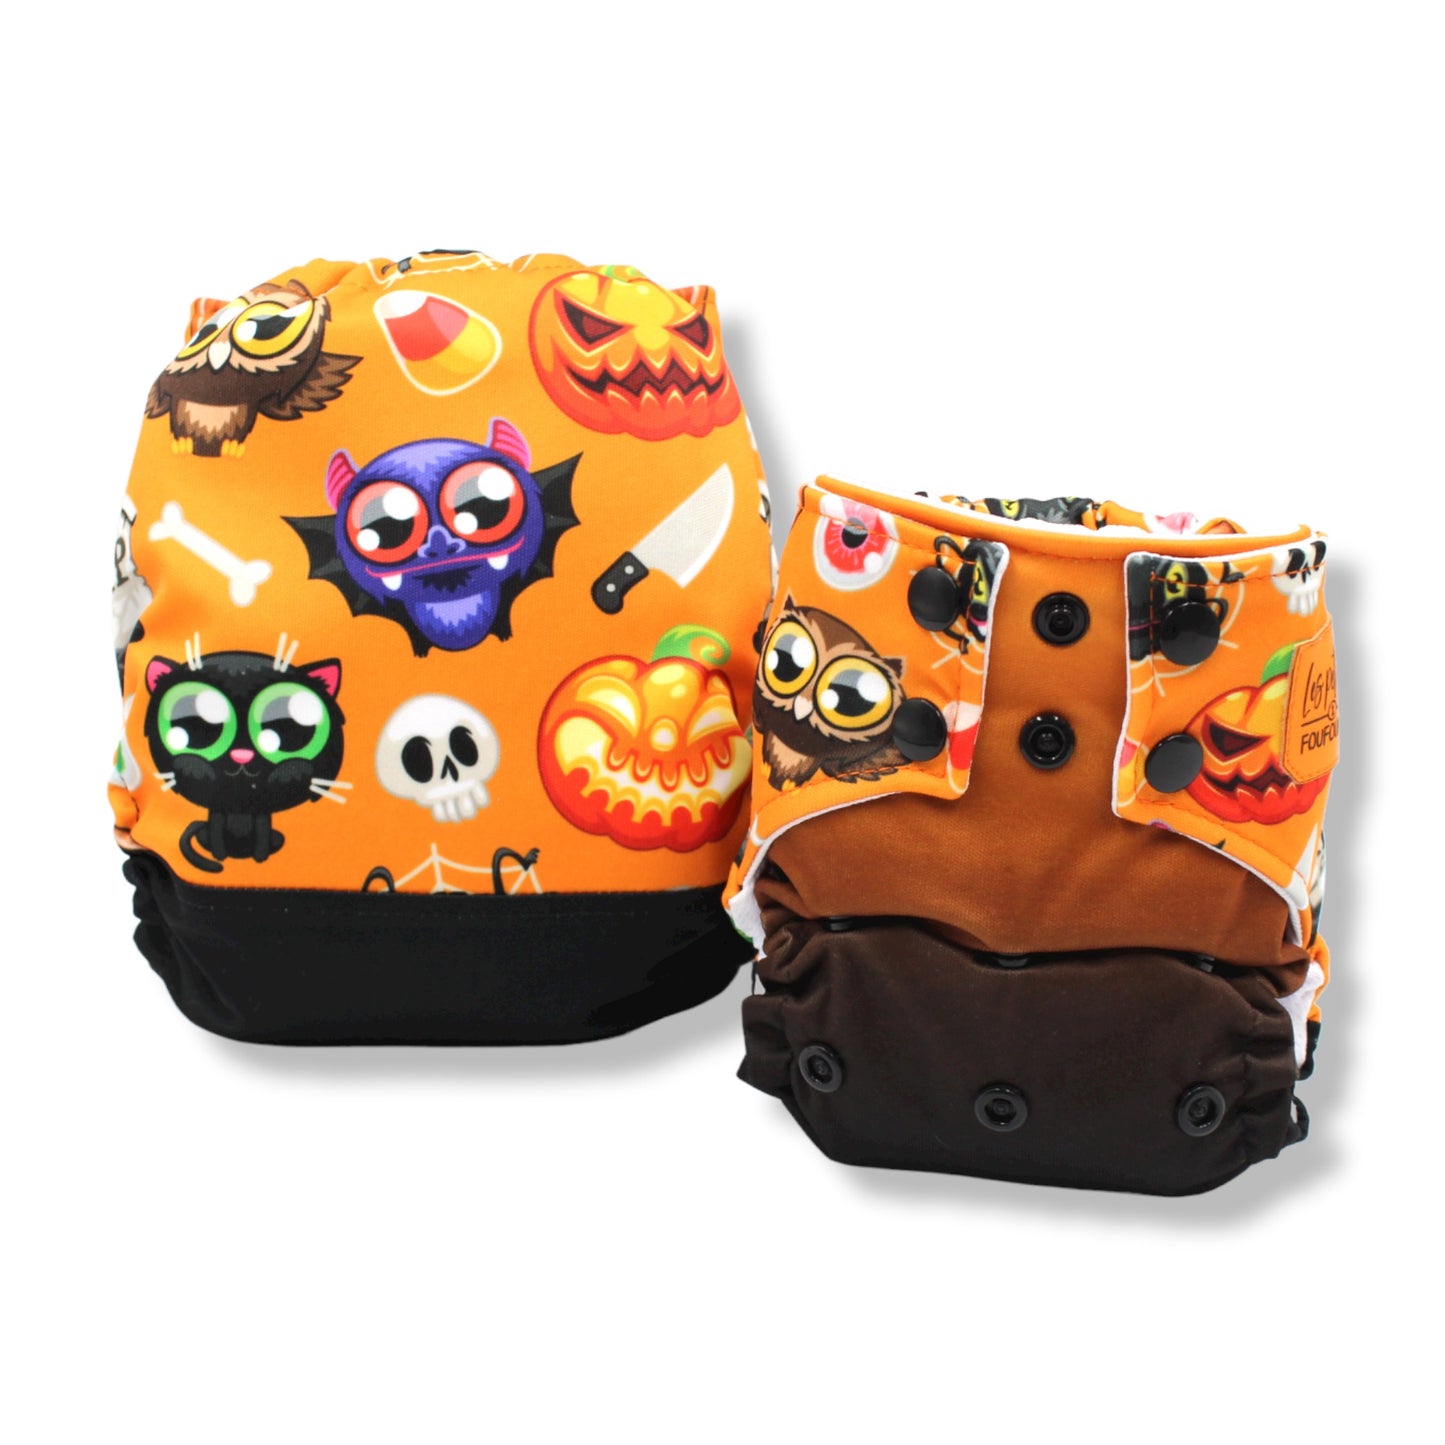 Couches - Halloween cuties (7250733334665)